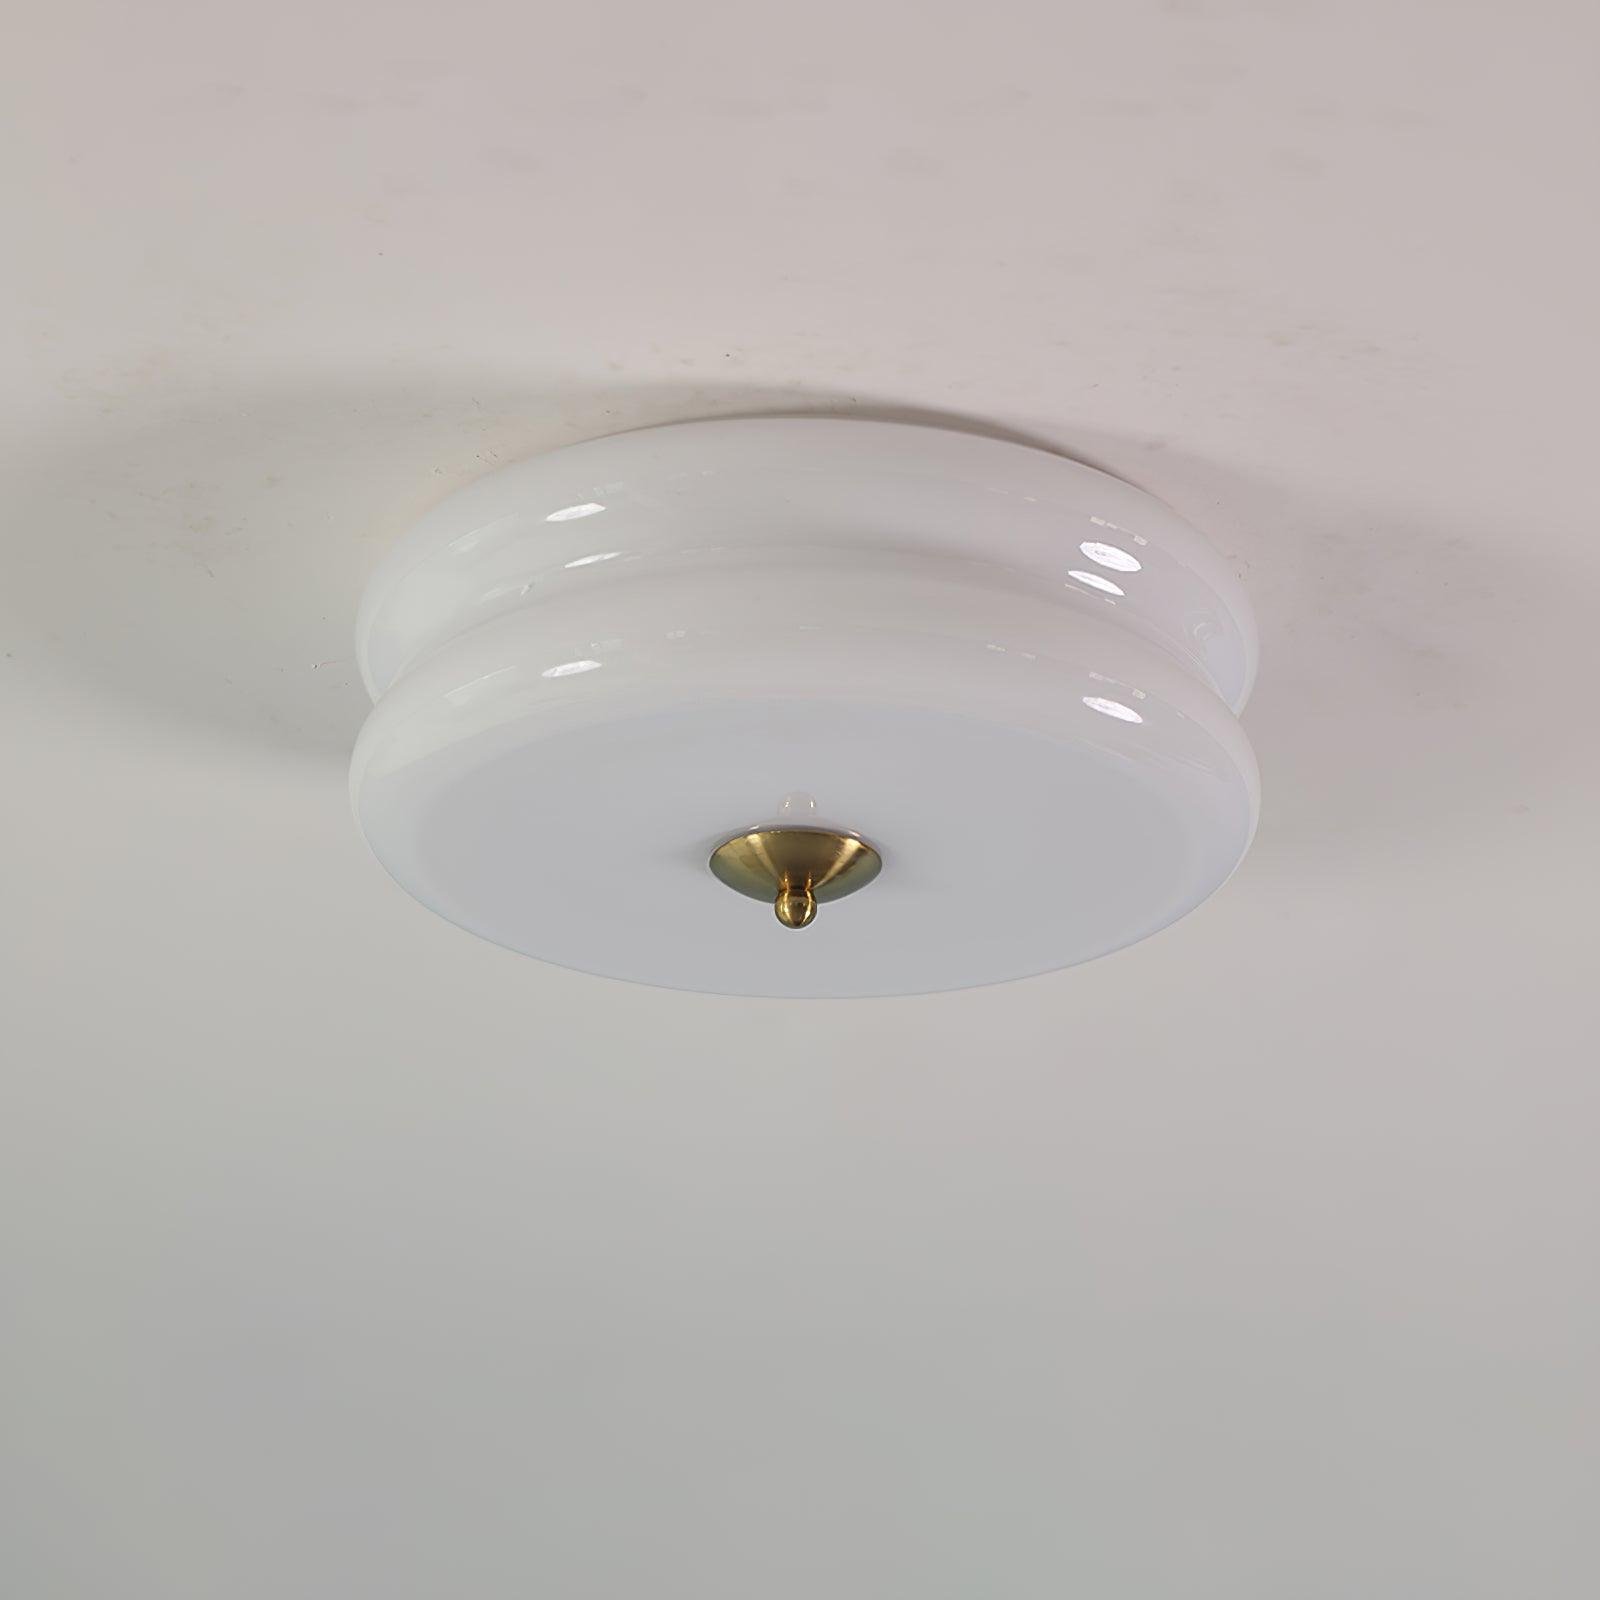 Art Deco Vintage Ceiling Light in Gold and White with Cool Light, Diameter 12.6 inches x Height 5.1 inches (32cm x 13cm)